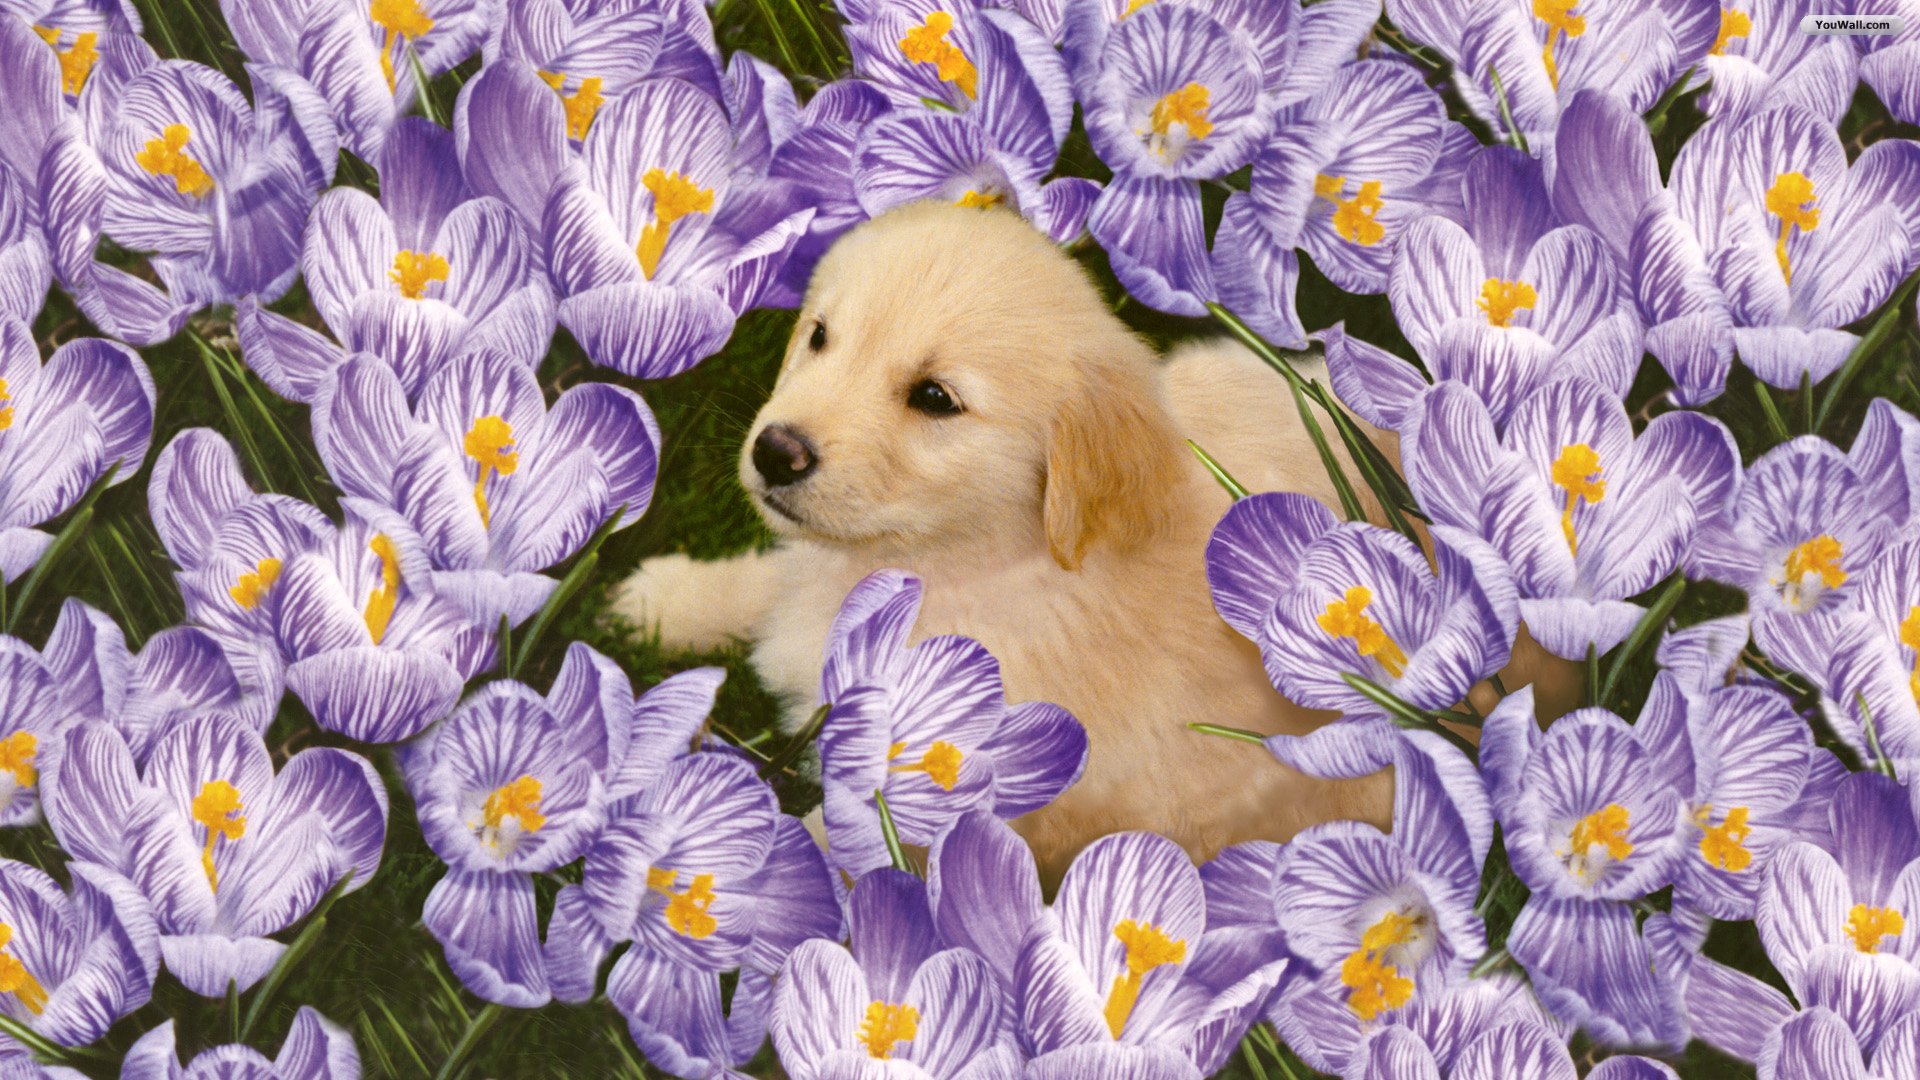 Cute Dog And Flowers Wallpaper